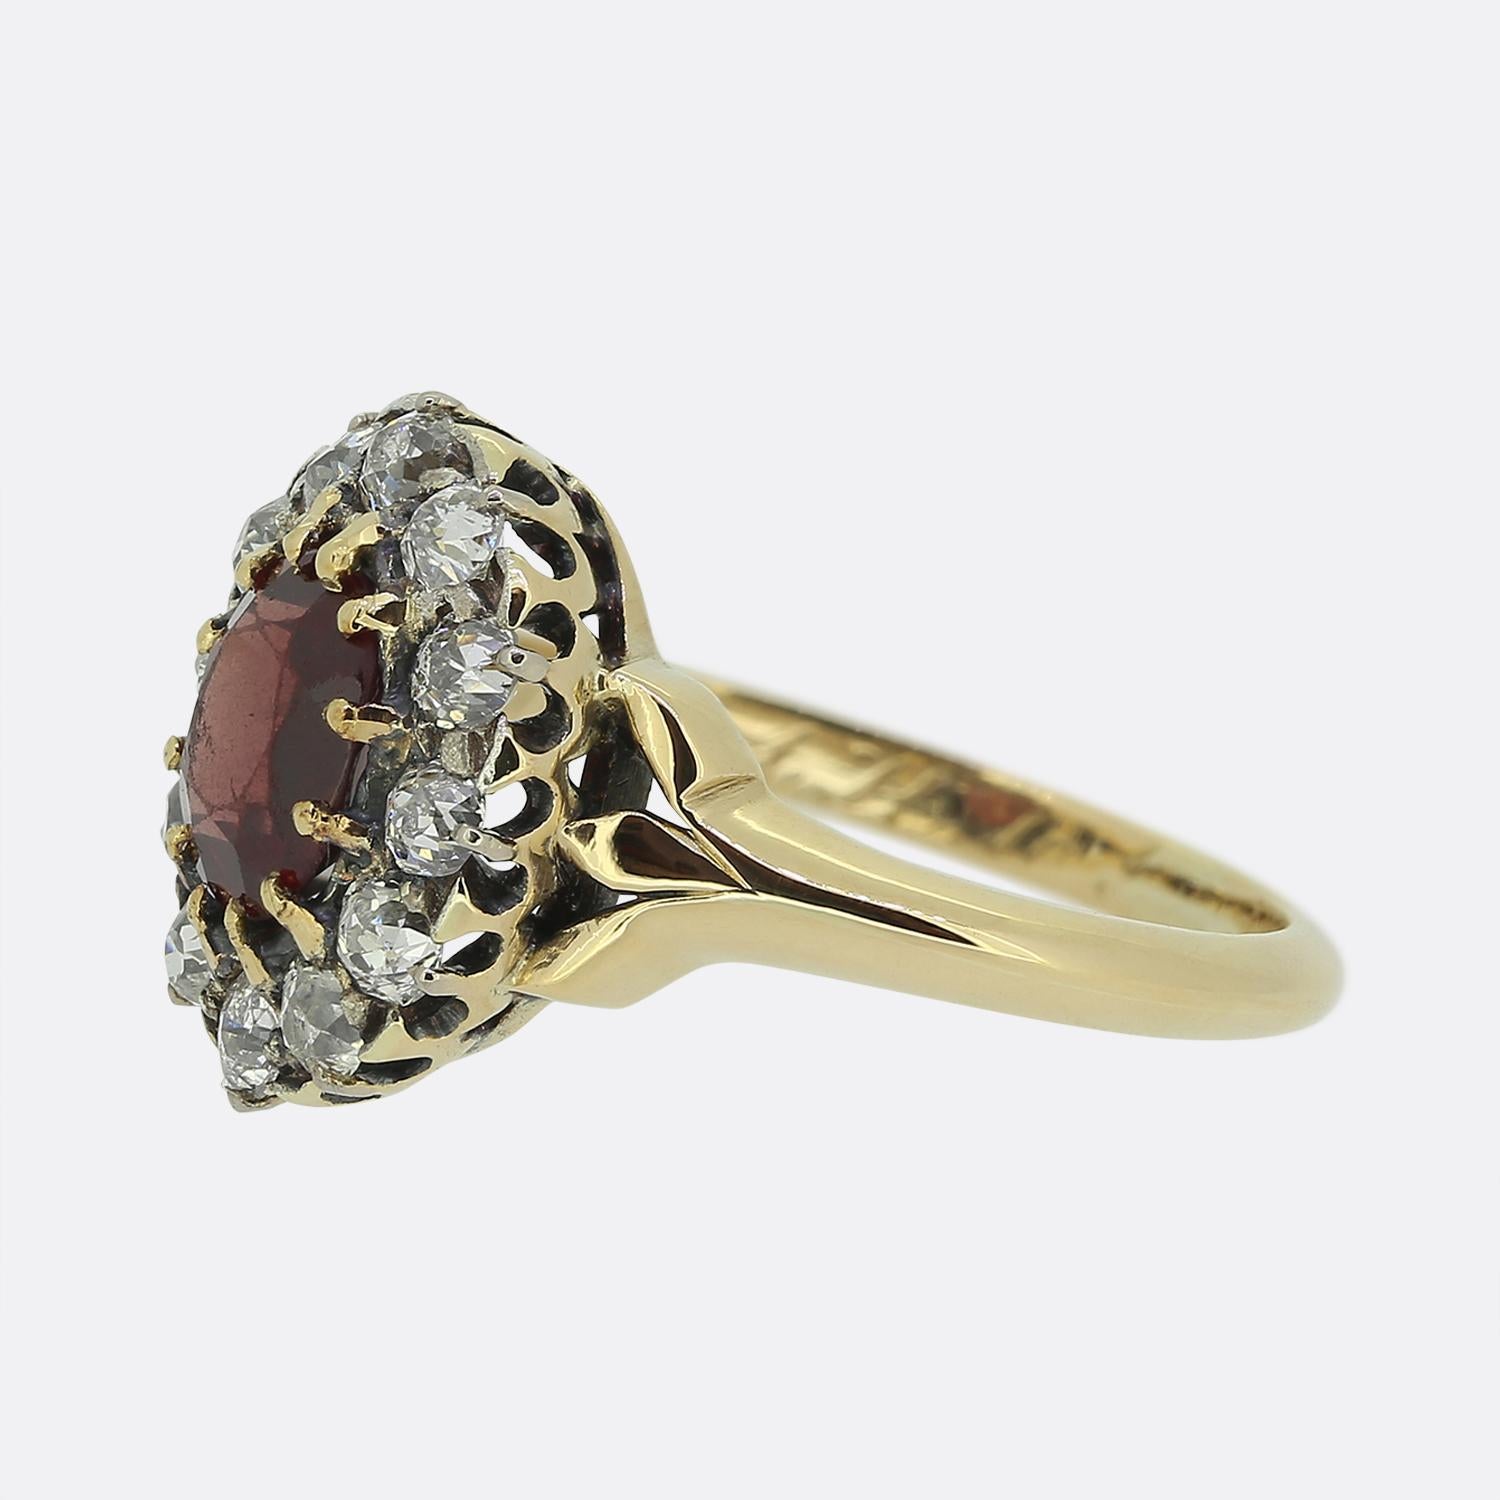 Here we have a wonderful Victorian spinel and diamond cluster ring. The central spinel is a highly desirable pigeon blood red hue with a slight orange undertone. The surrounding old cut diamonds are a bright white colour and sit slightly below the